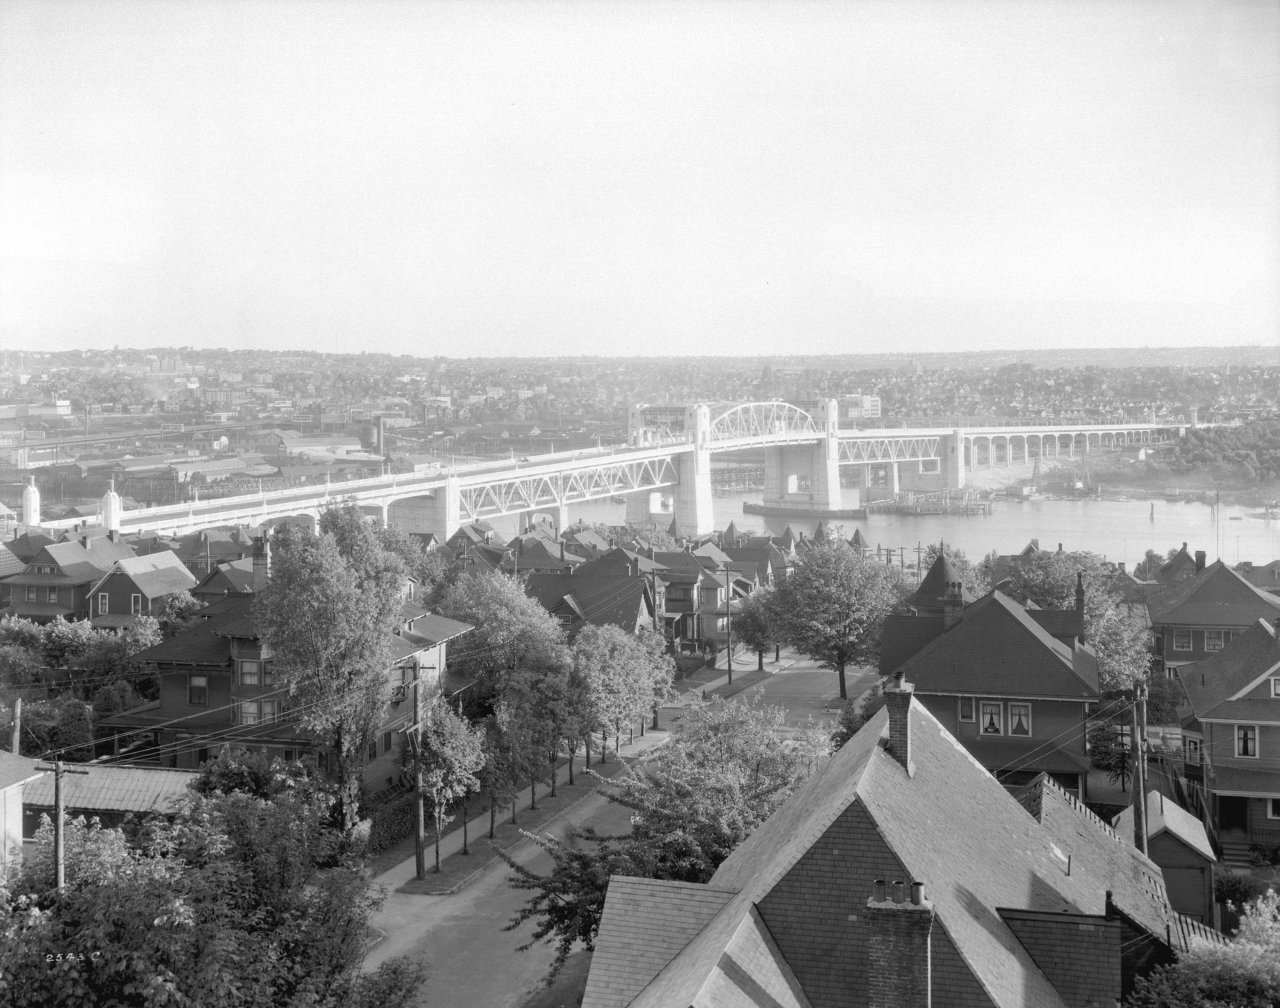 Burrard Bridge. View looking south from Pacific Street near Thurlow Street. Source: City of Vancouver Archives 99-4215